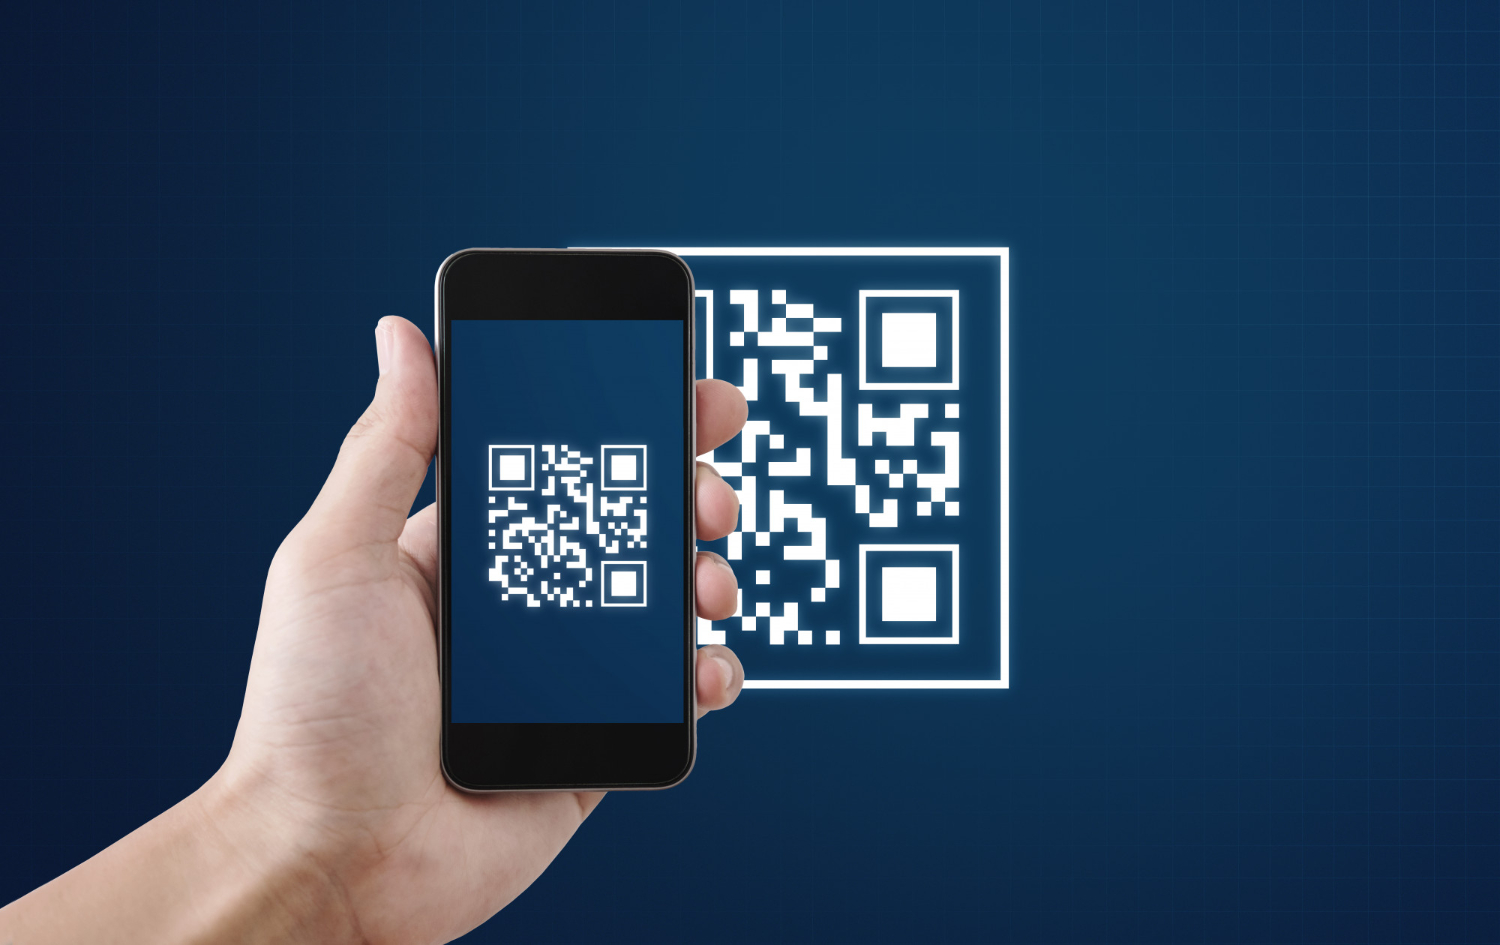 qr-code-scanning-payment-verification-hand-using-mobile-phone-scan-qr-code